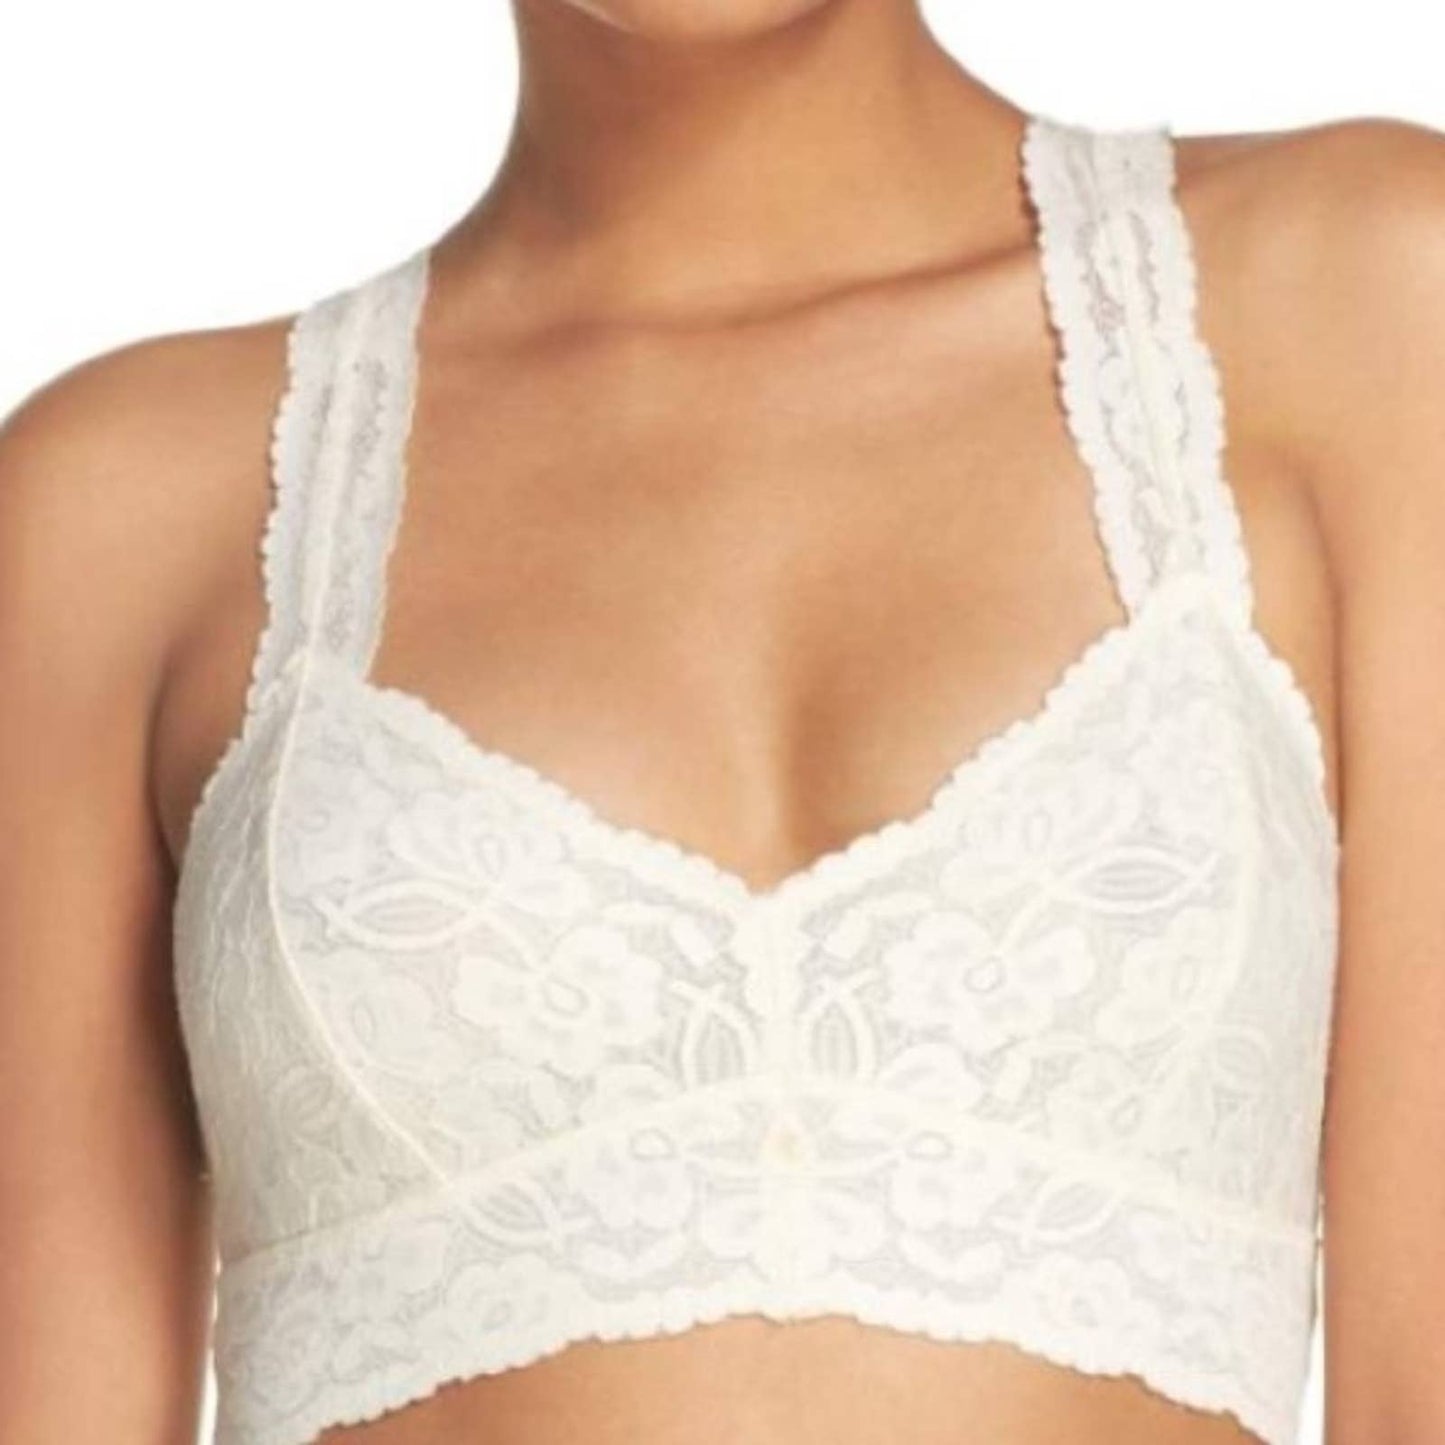 Free People Galloon Lace Racerback Bra in White NWT Brand New